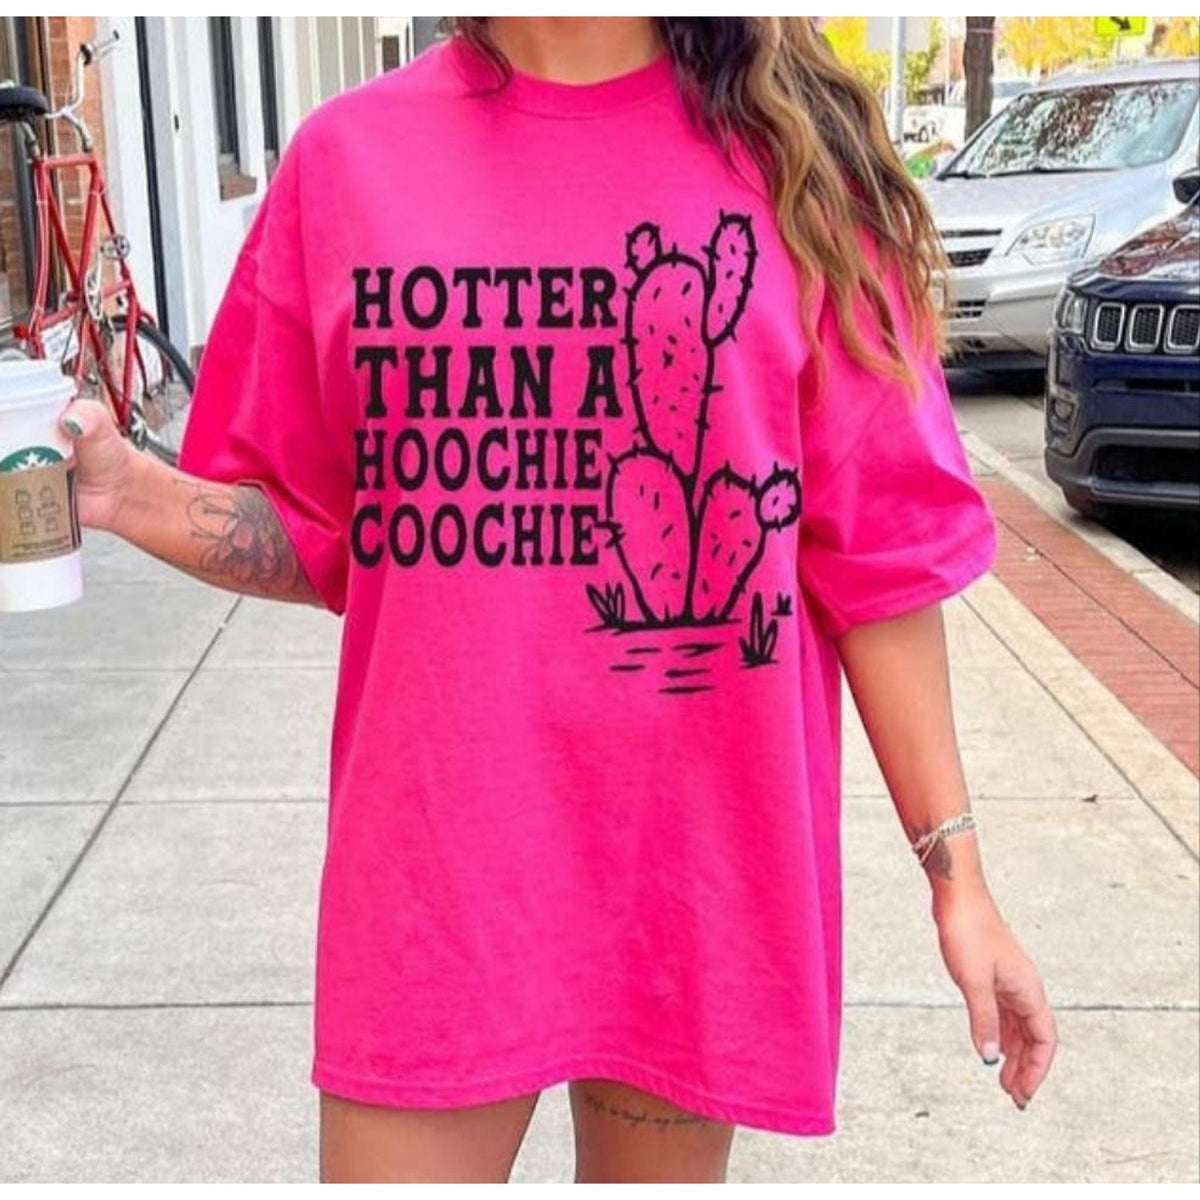 Hotter Than a Hoochie Coochie Hot Pink Graphic Tee | Country Graphic Tee TheFringeCultureCollective